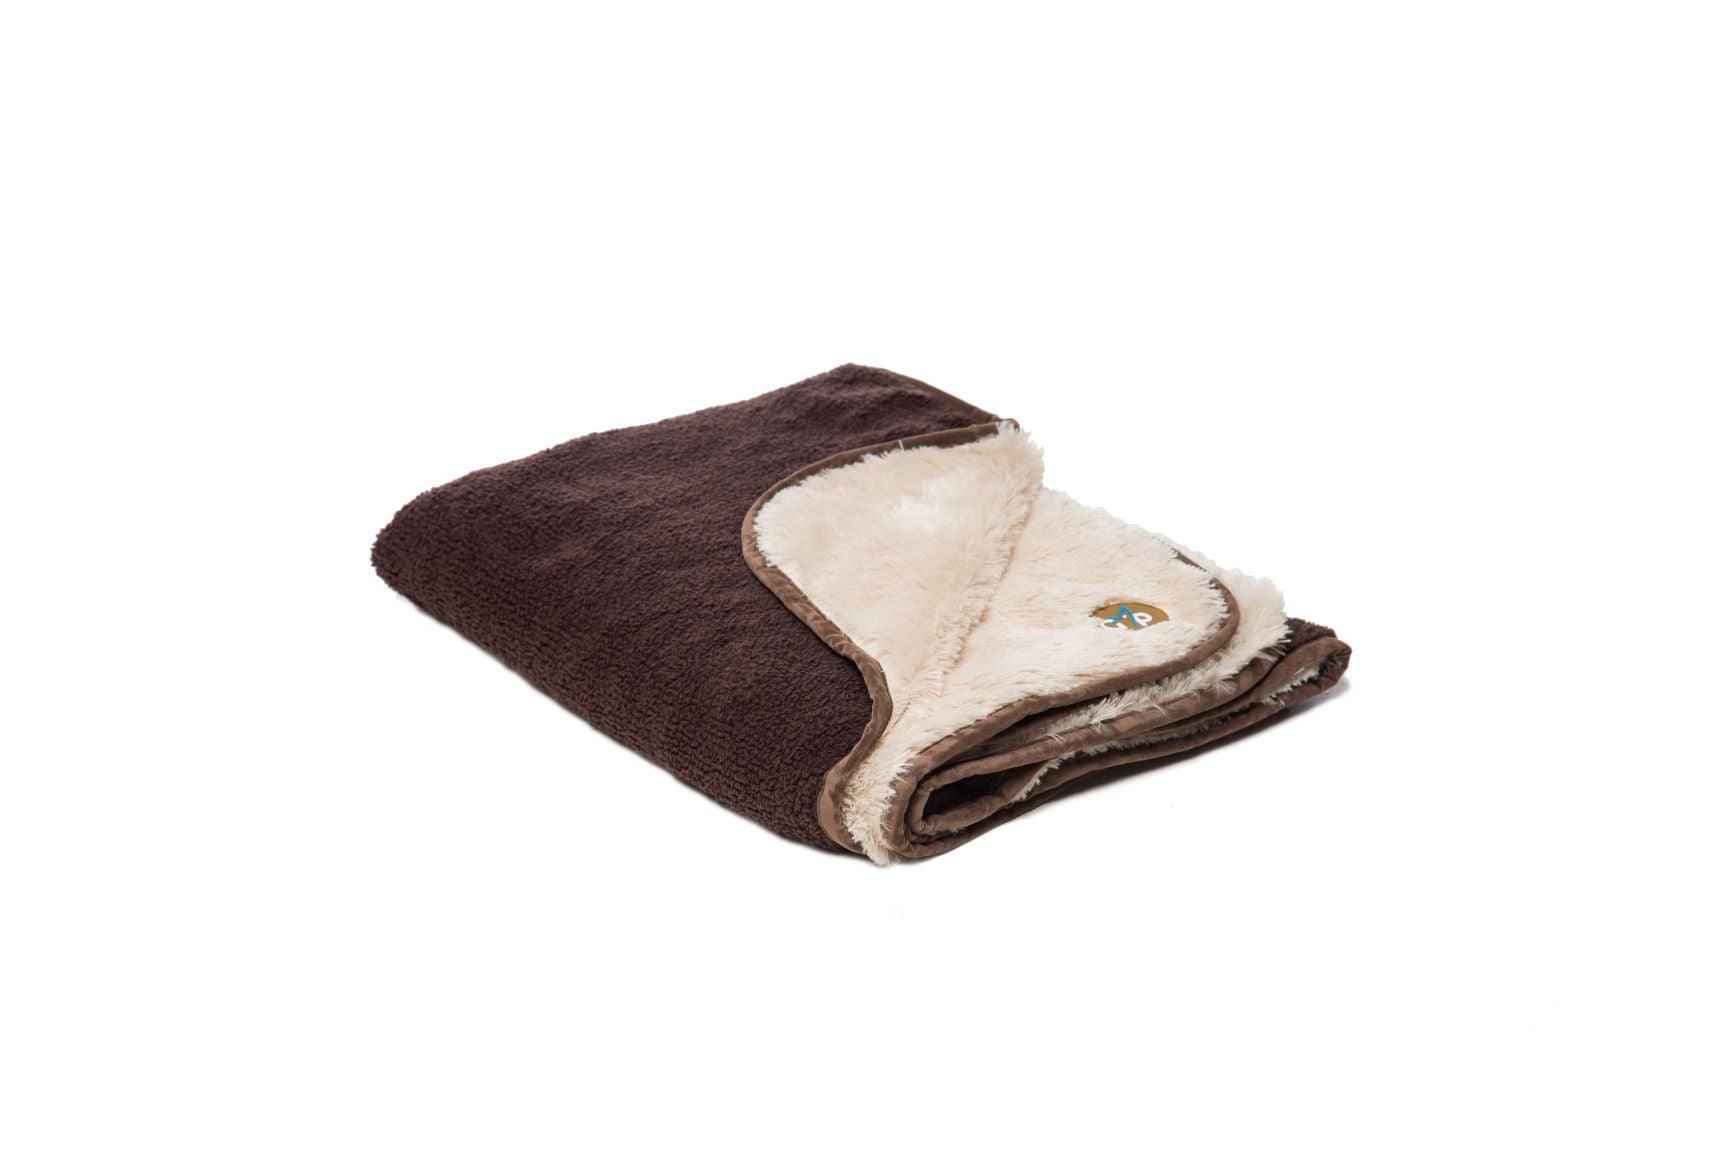 View Nordic Blanket Brown Double Sided Medium 100x75cm information